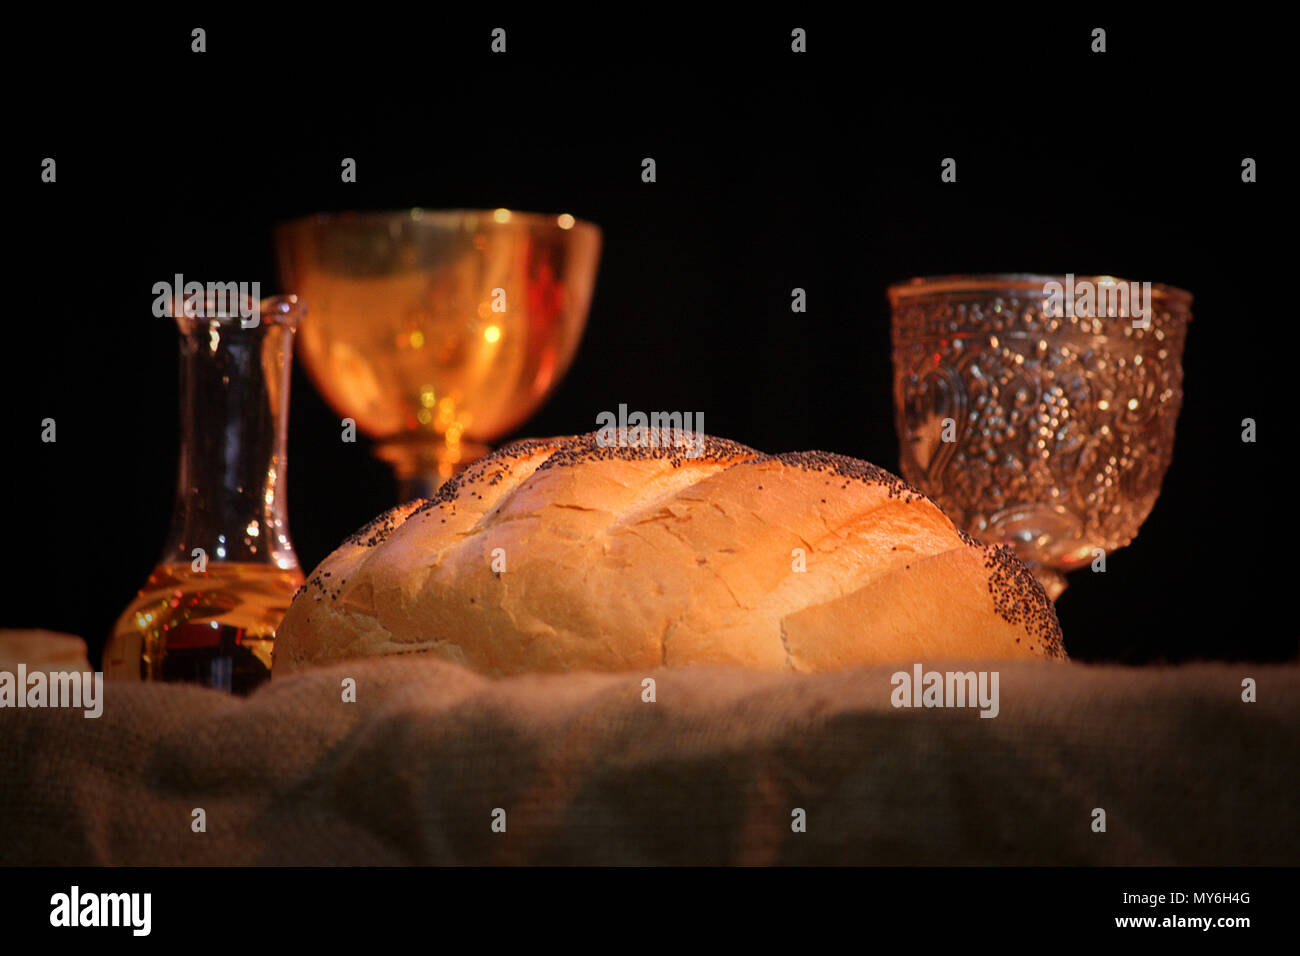 Bread wine holy blessed water on table for Easter liturgy mass with beautiful warm lighting. Image of christian symbols, religion and tradition. Lent Stock Photo